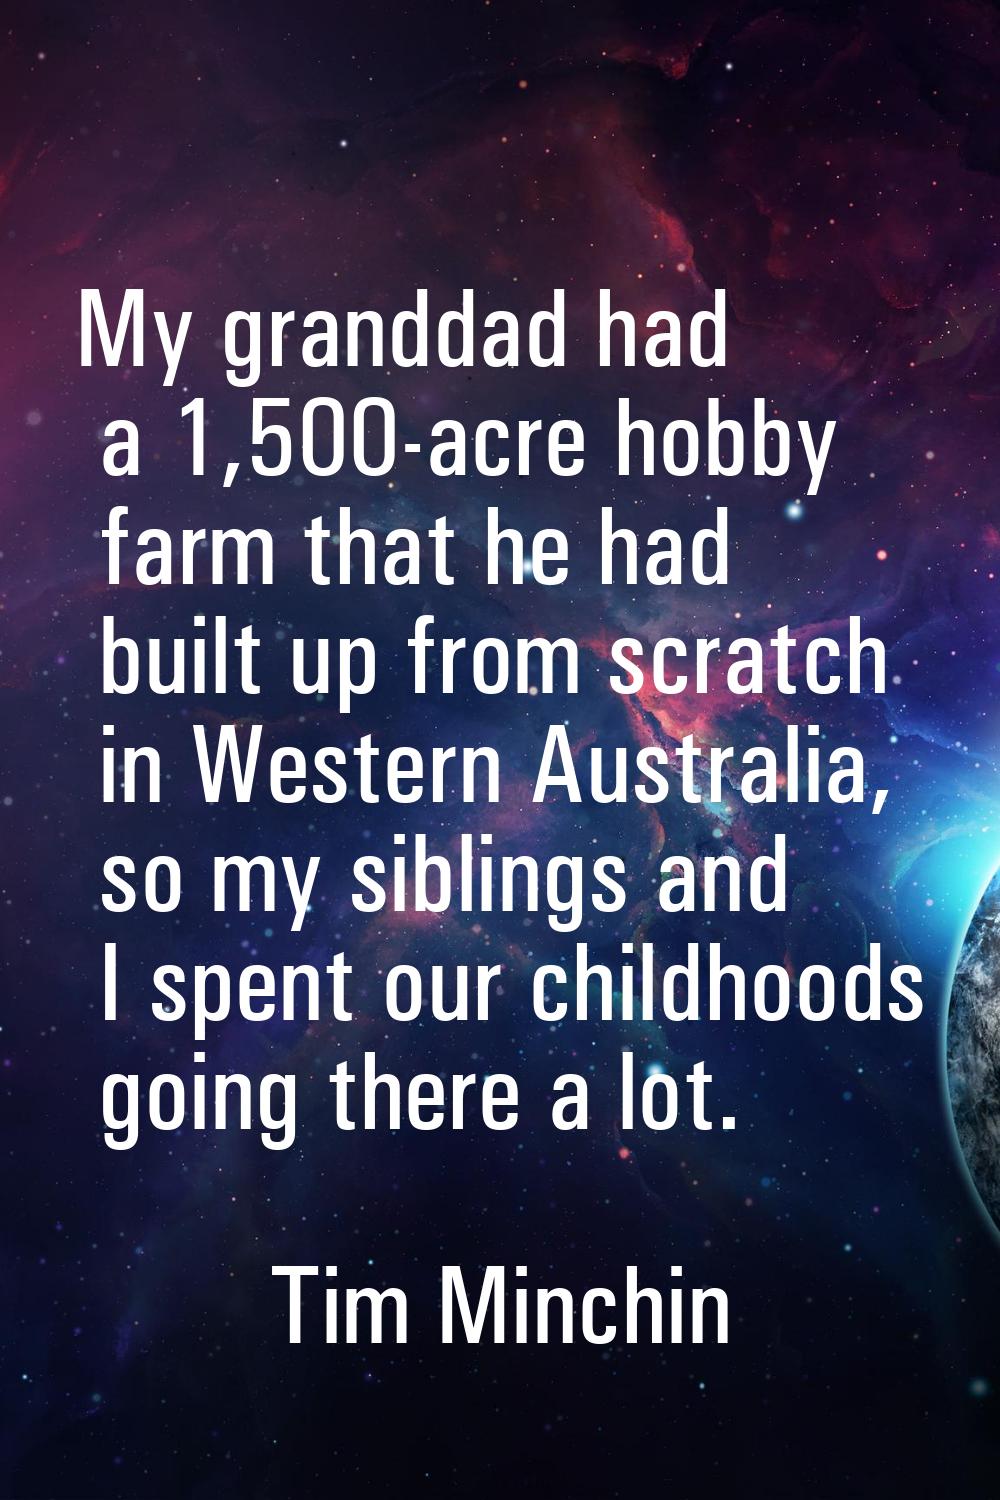 My granddad had a 1,500-acre hobby farm that he had built up from scratch in Western Australia, so 